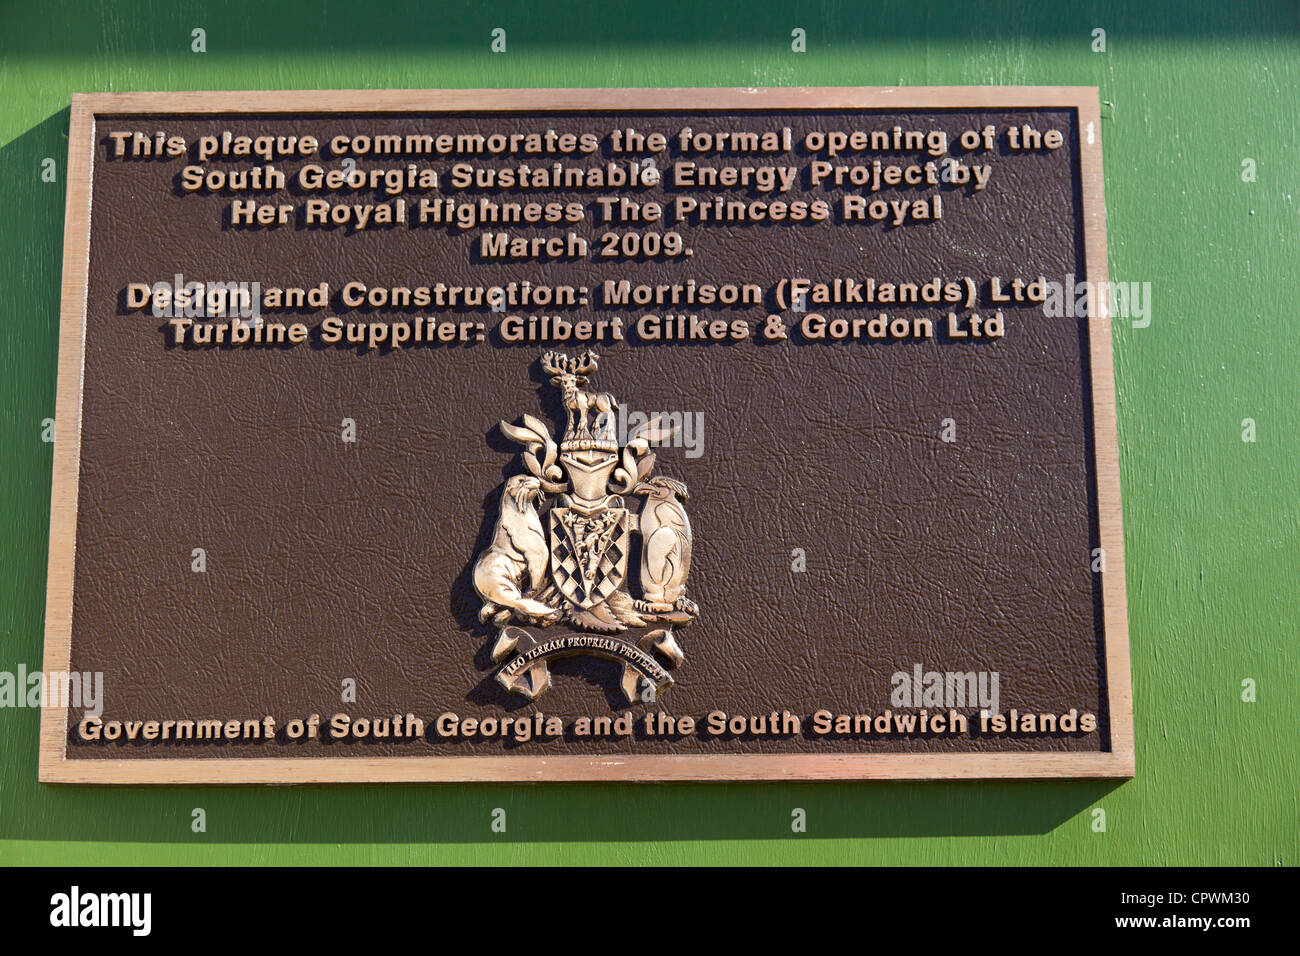 Plaque commemorating the visit of Princess Anne to GRytviken in March 2009 to open the sustainable energy project, South Georgia Stock Photo